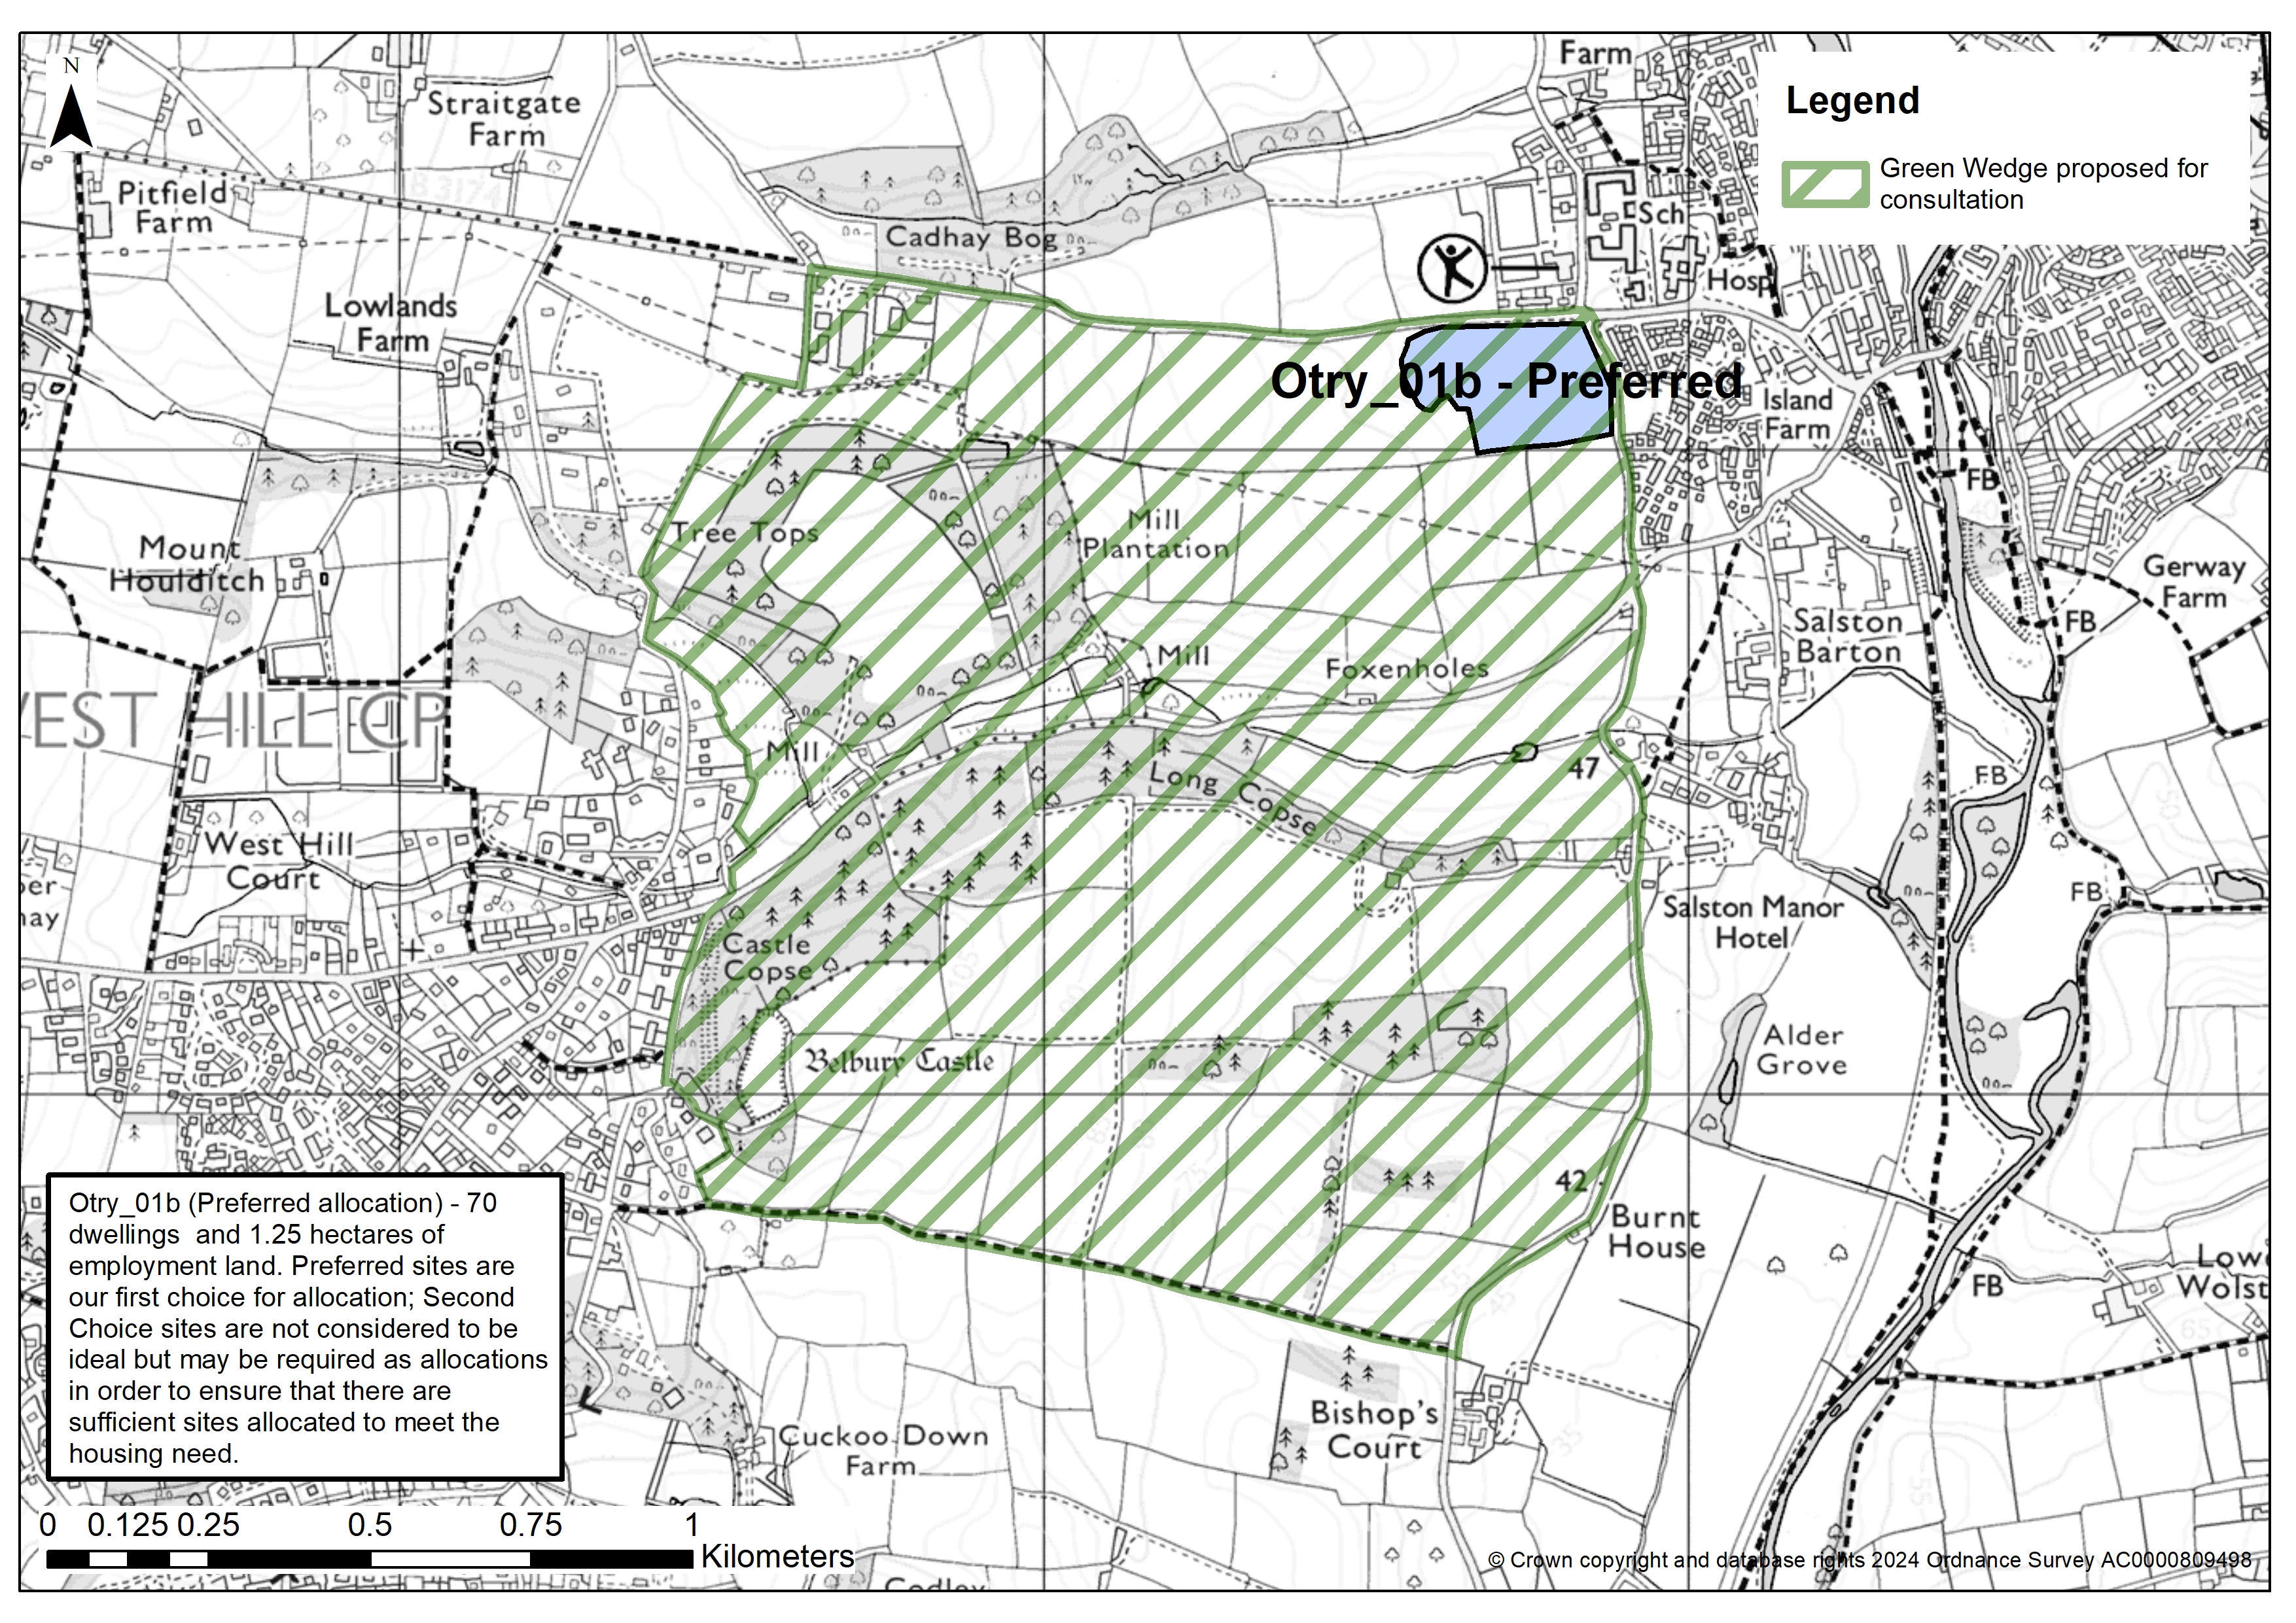 Map of the Green Wedge between Ottery St Mary and West Hill